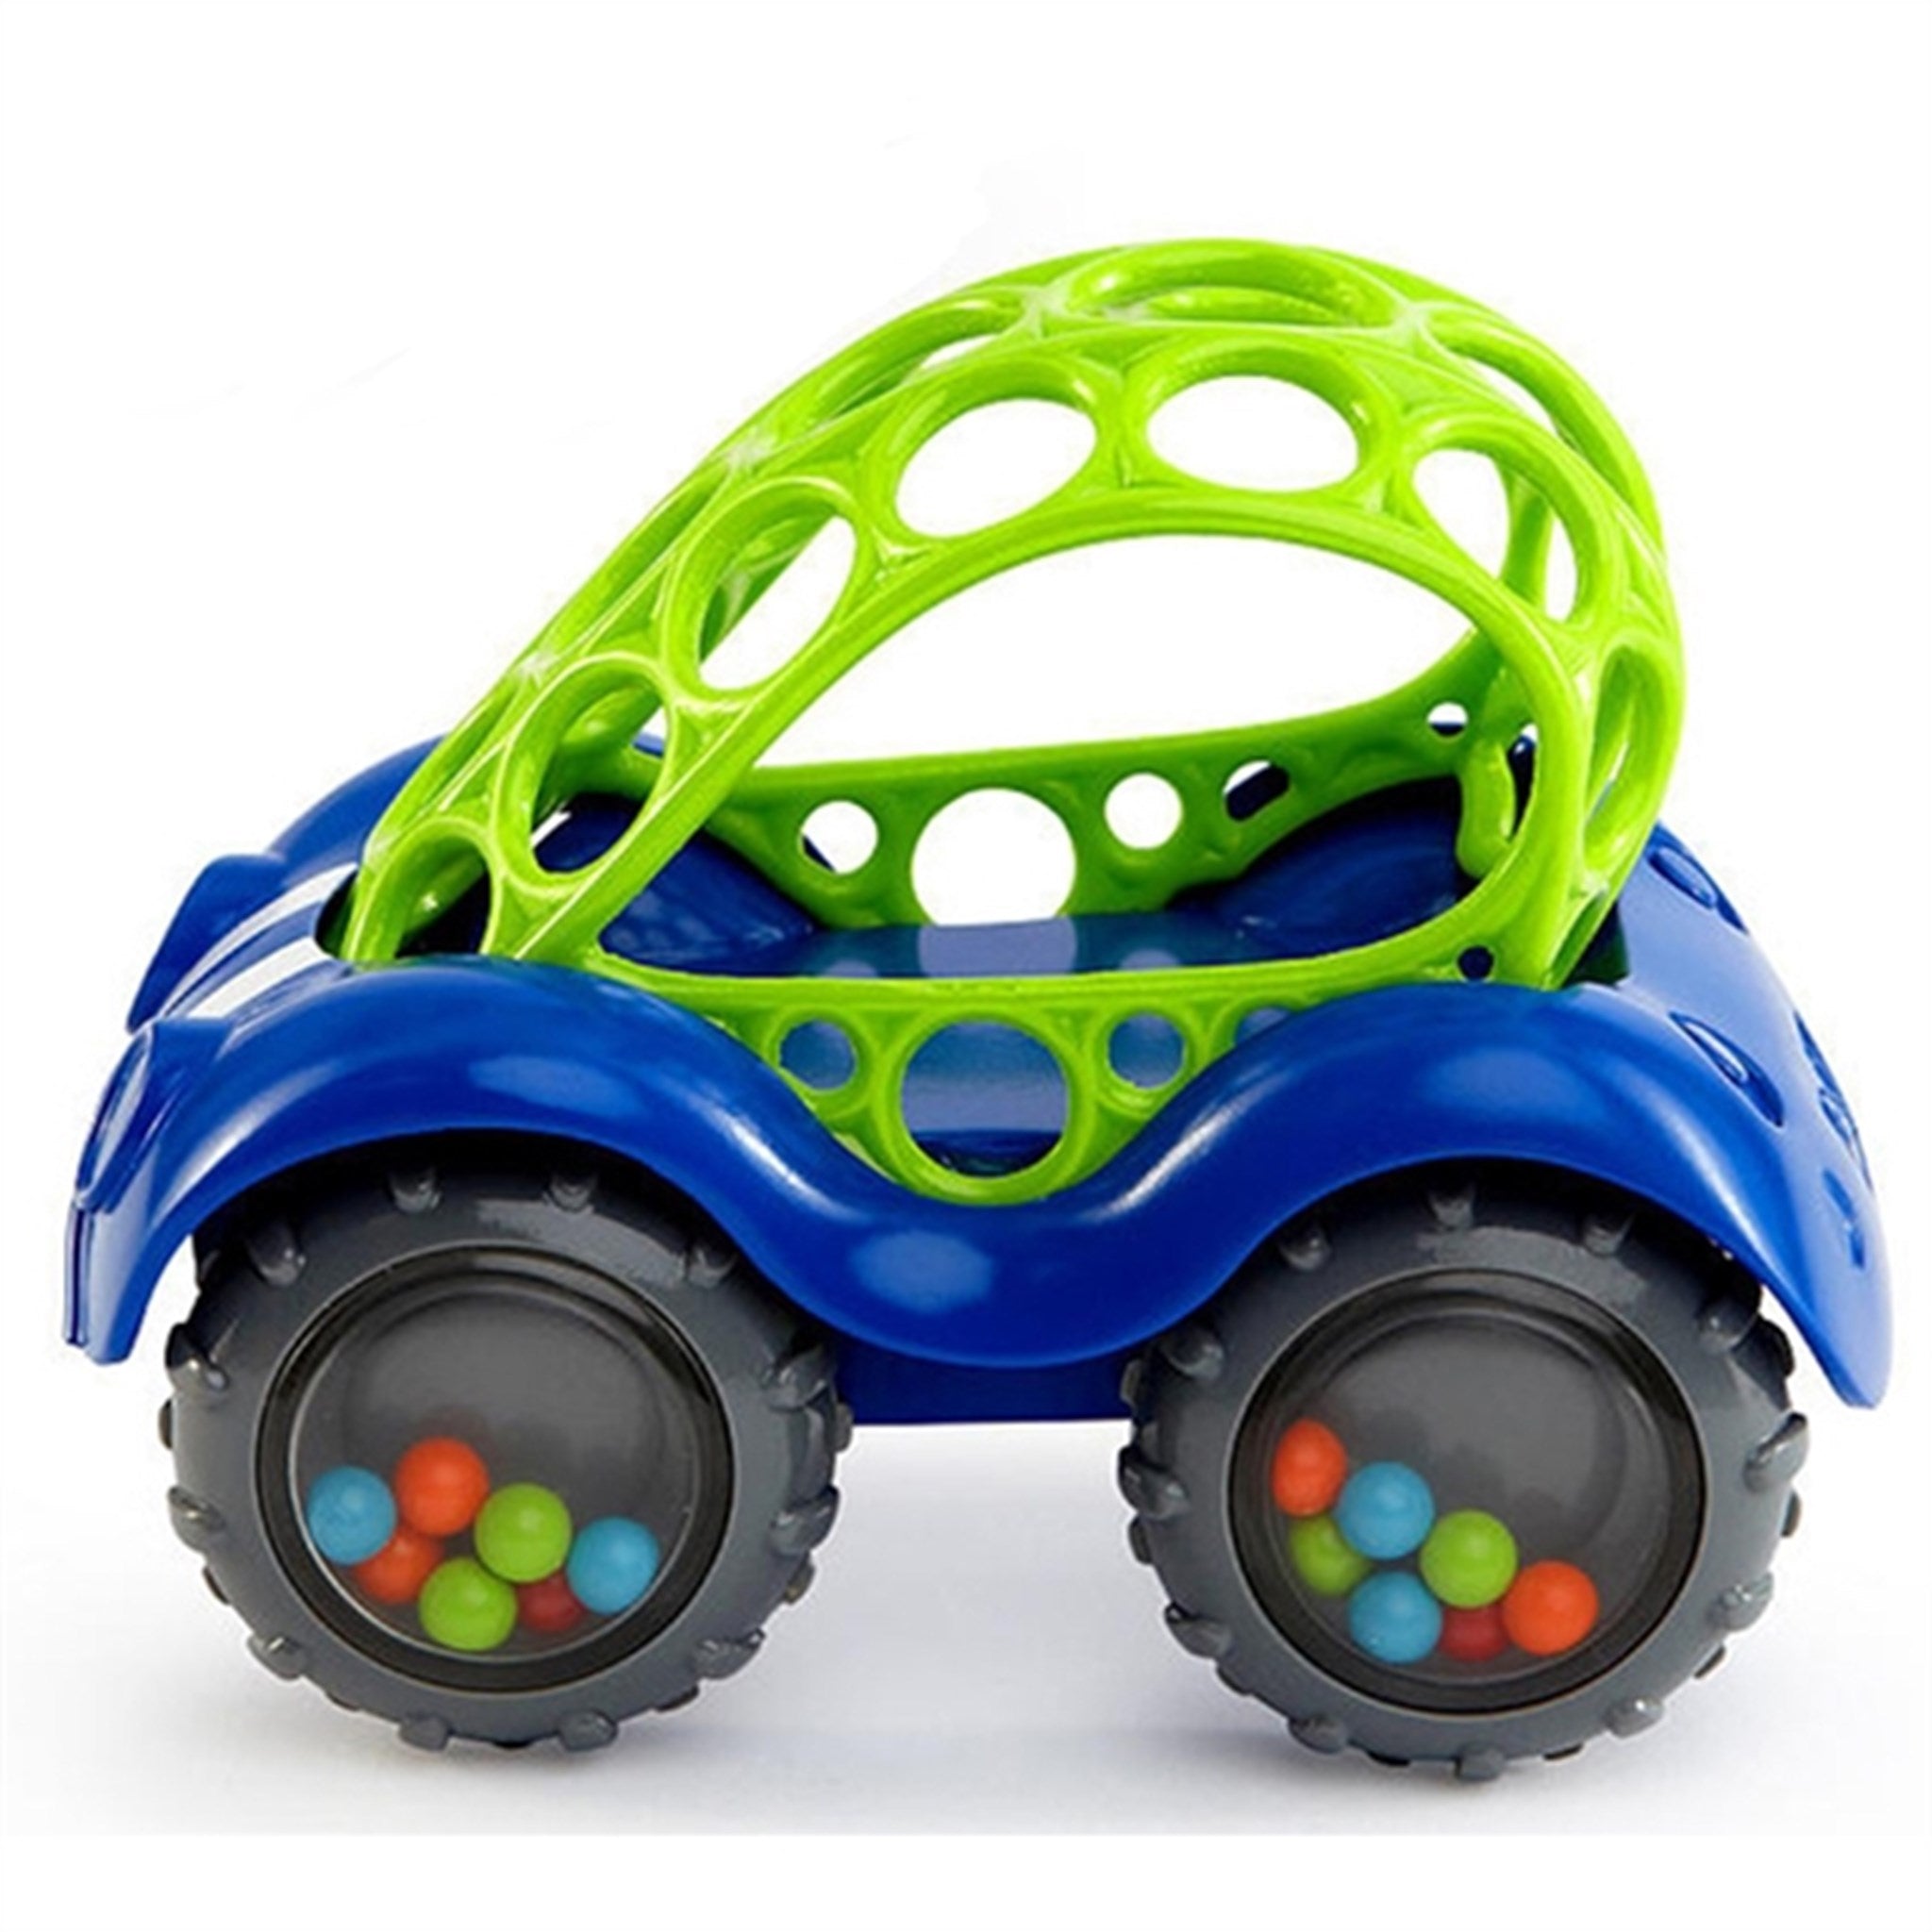 Oball Rattle & Roll Blue/Green